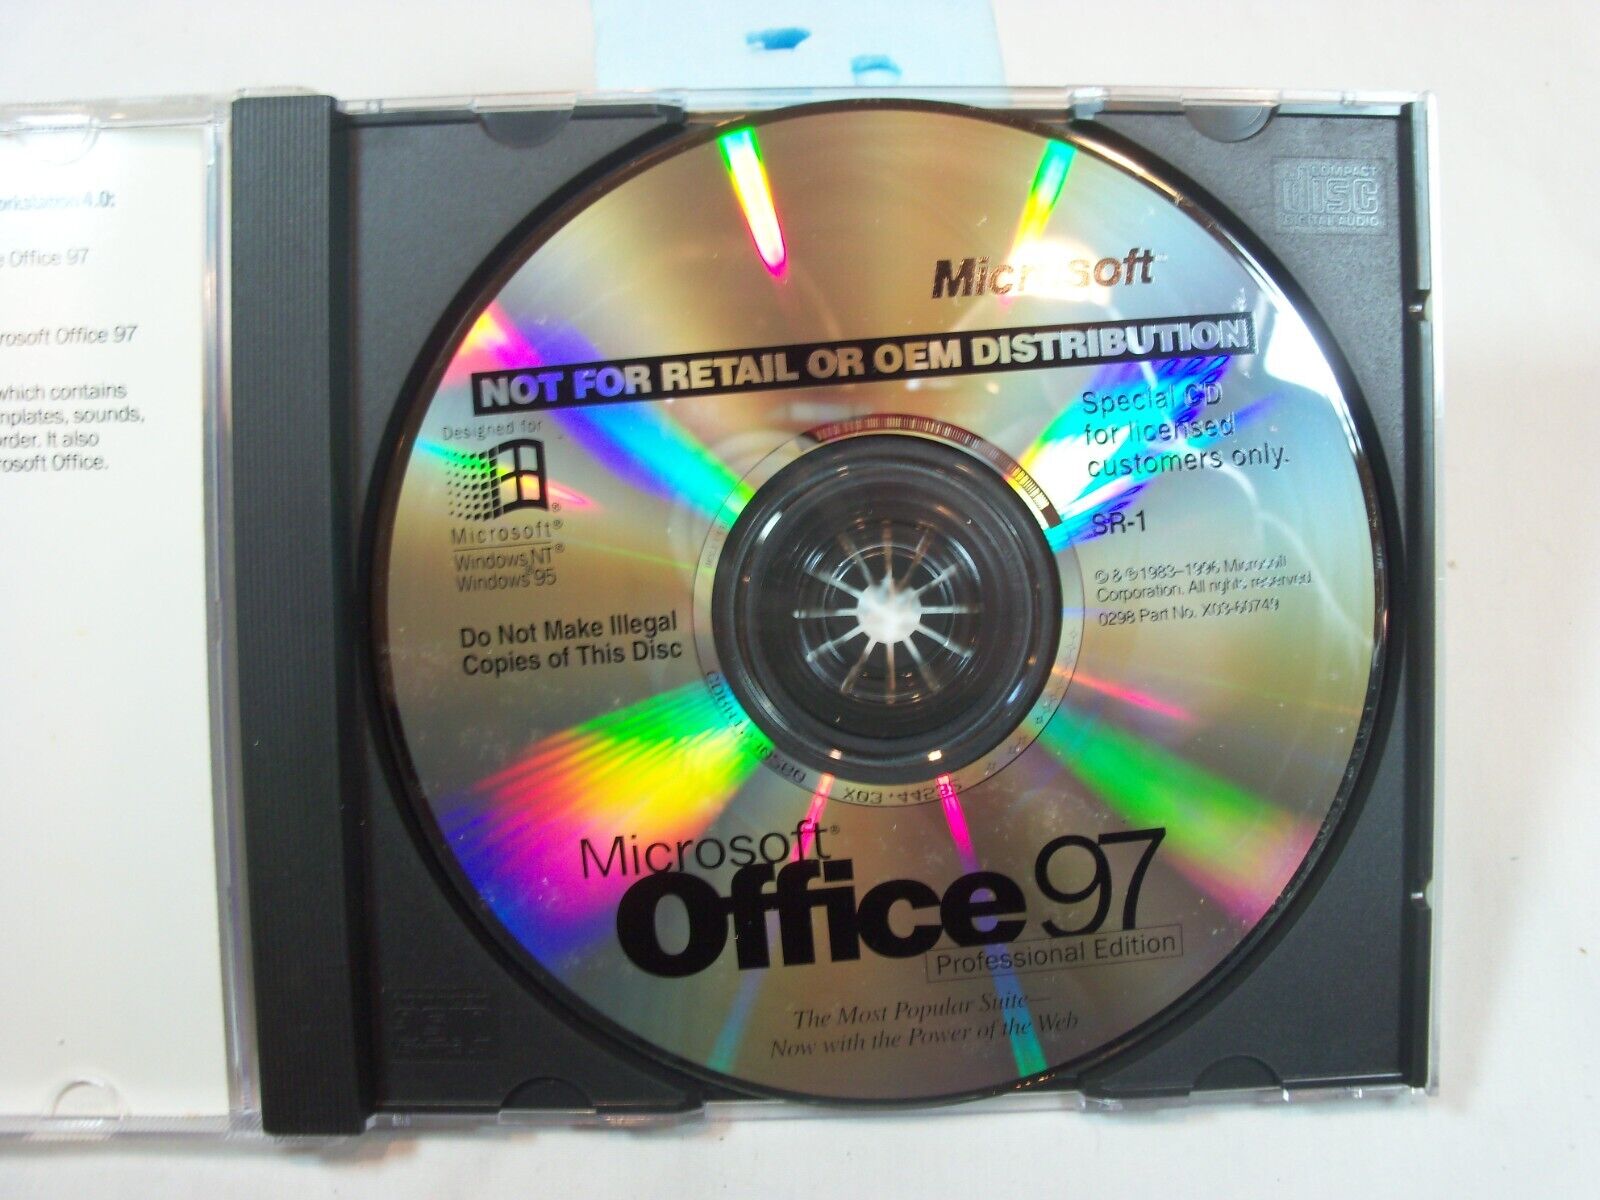 MICROSOFT OFFICE 97 PROFESSIONAL EDITION 90844 with Product Key